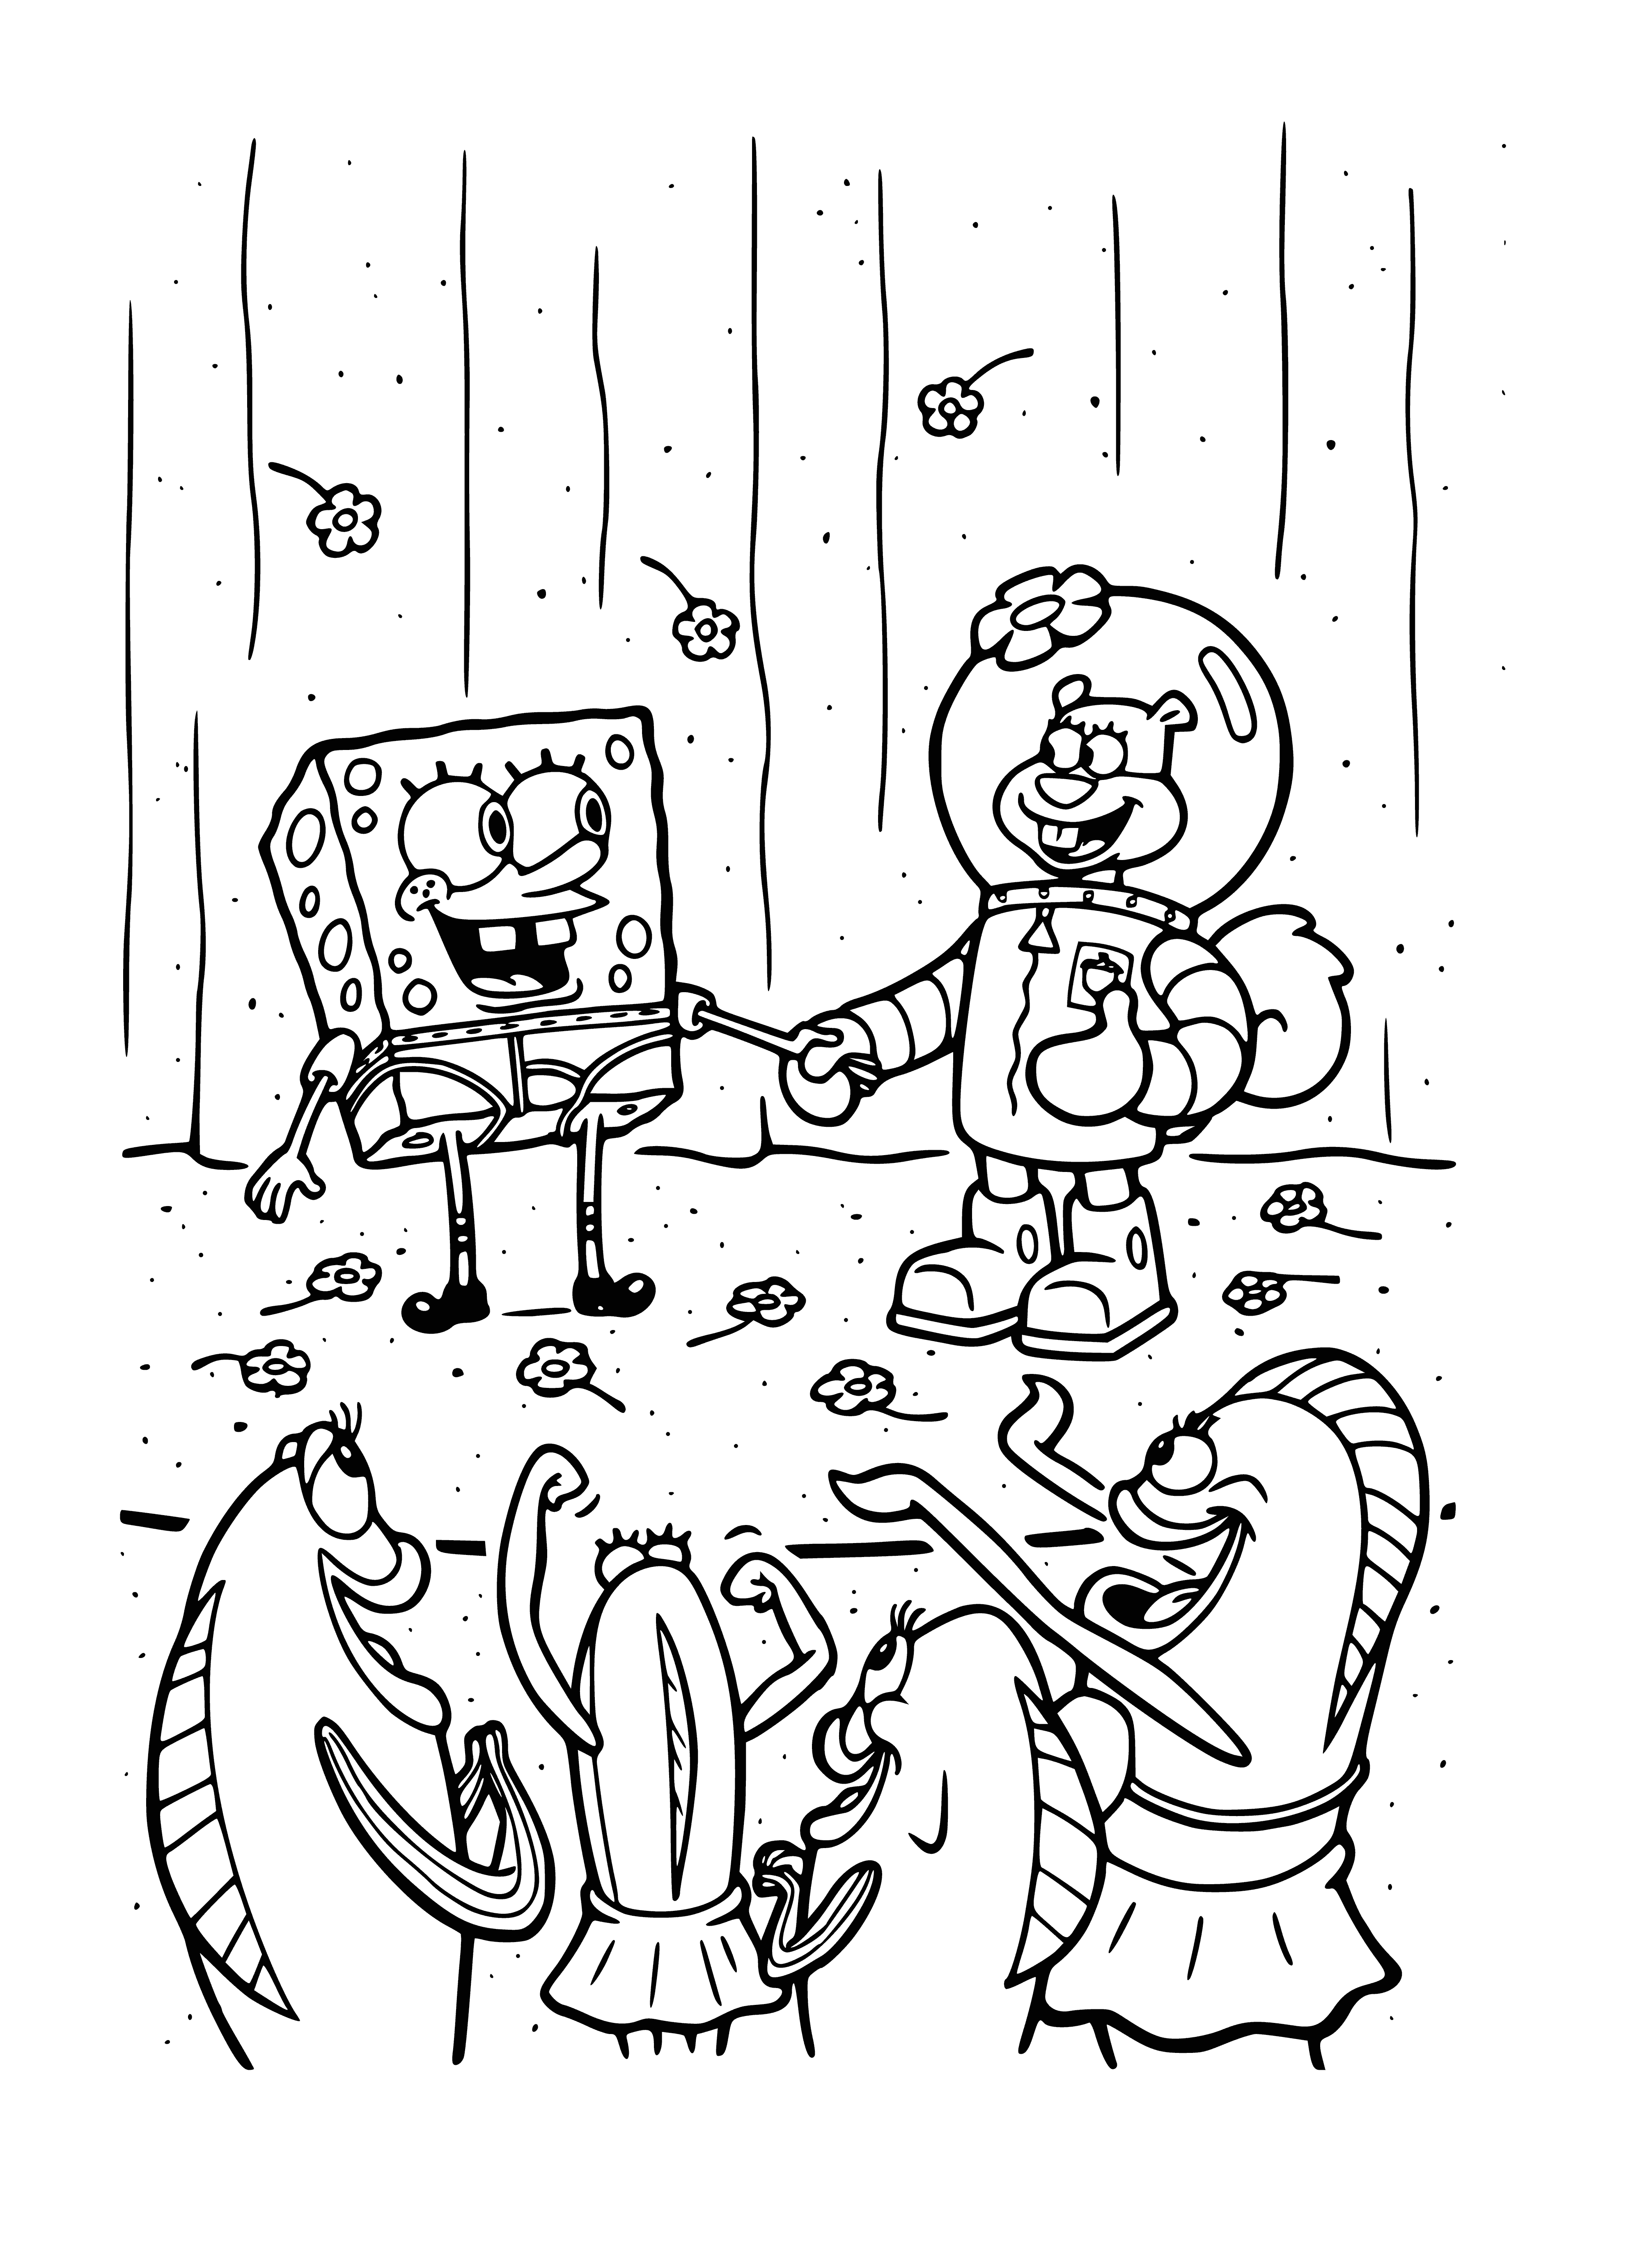 coloring page: SpongeBob holds a nut and a squirrel sits atop his head – he's smiling, the squirrel is curious.